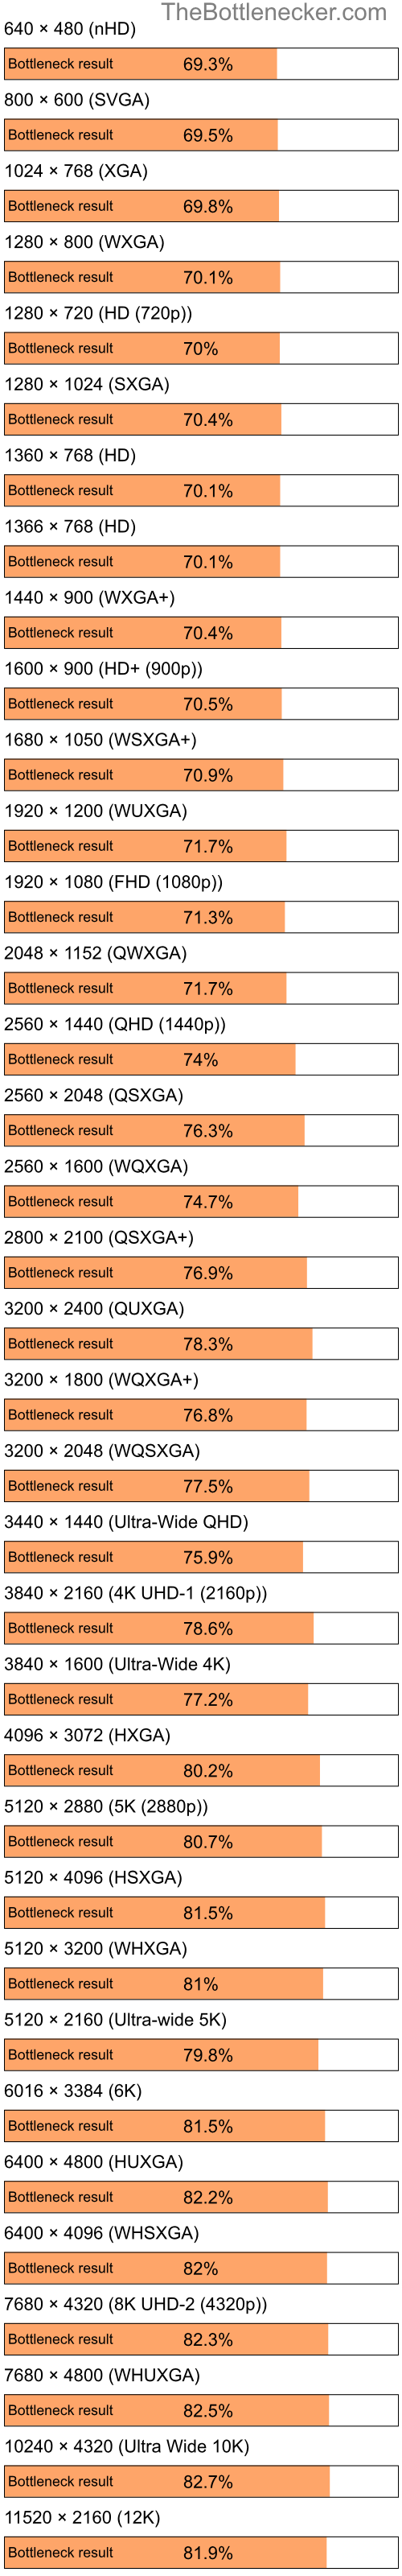 Bottleneck results by resolution for Intel Pentium 4 and NVIDIA GeForce G 105M in General Tasks